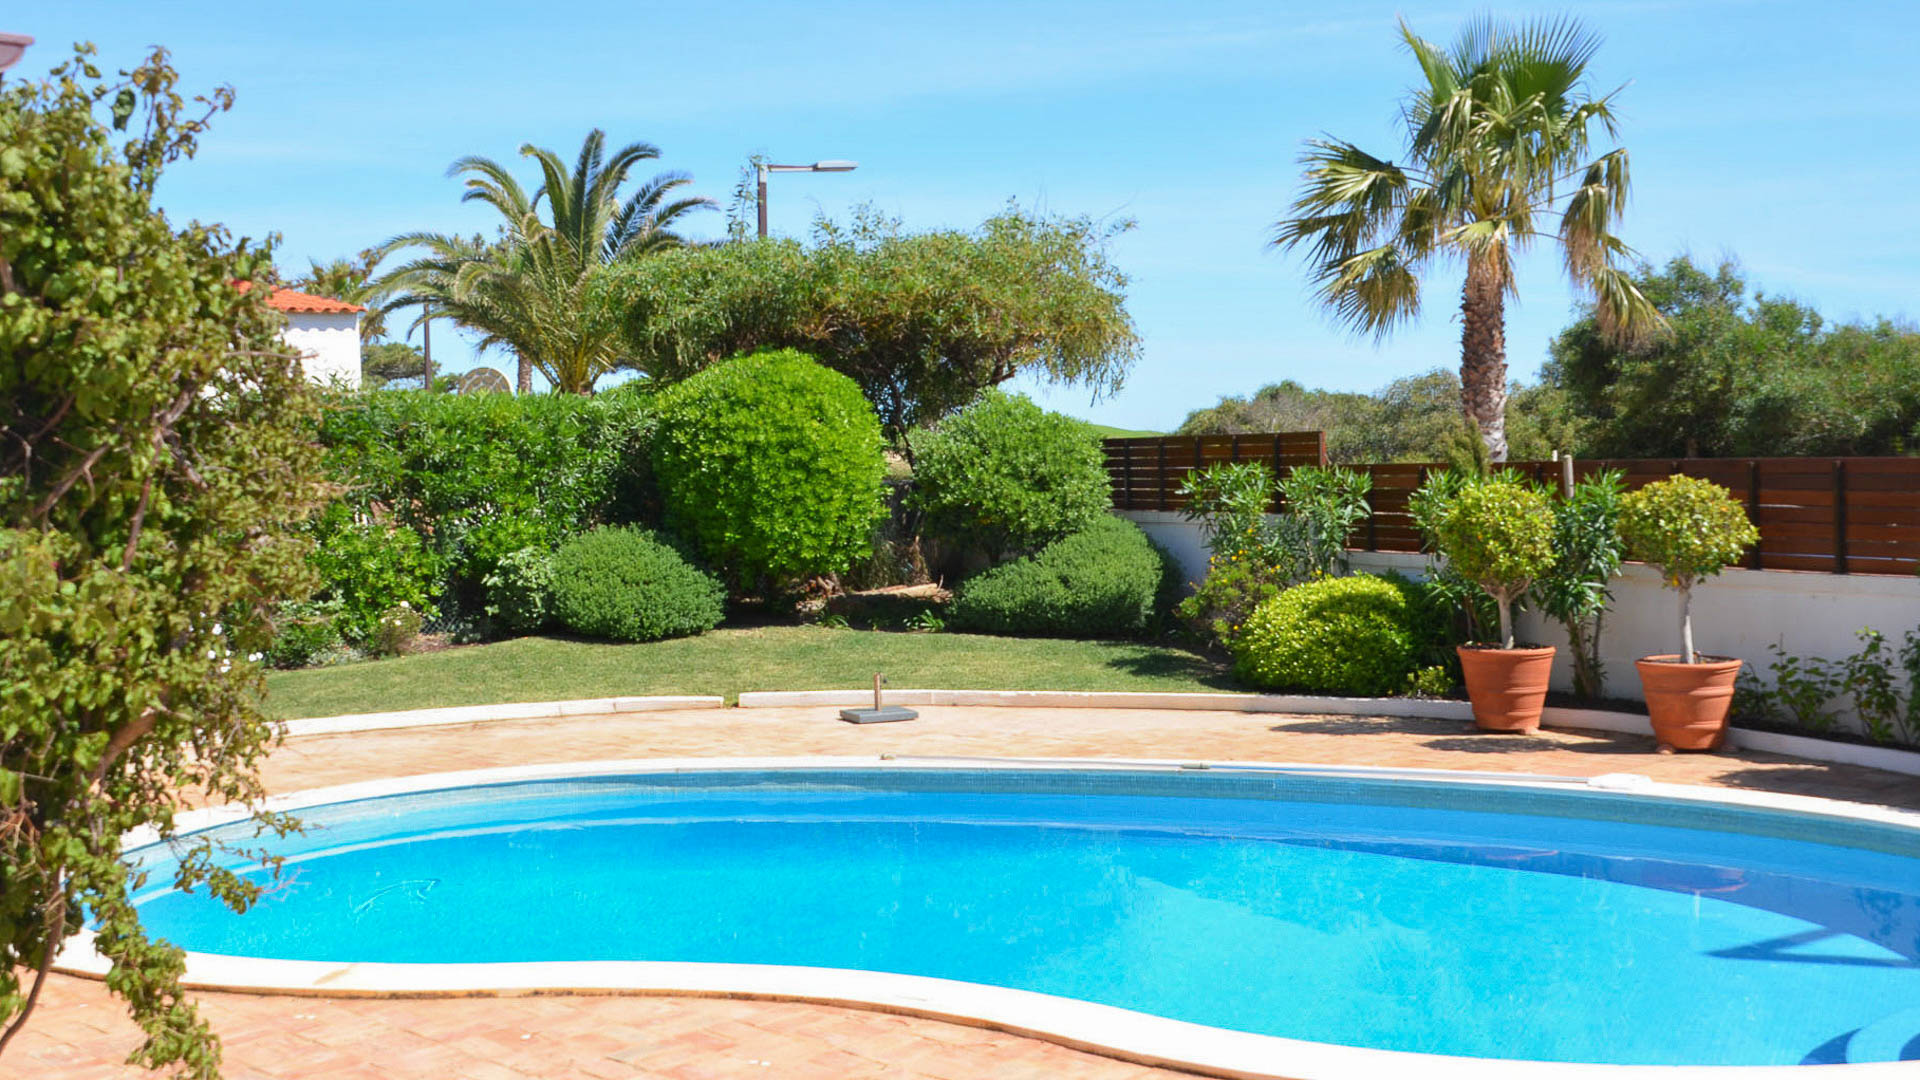 Property Image 2 - Vale do Lobo Ocean-view Rental Home with Pool